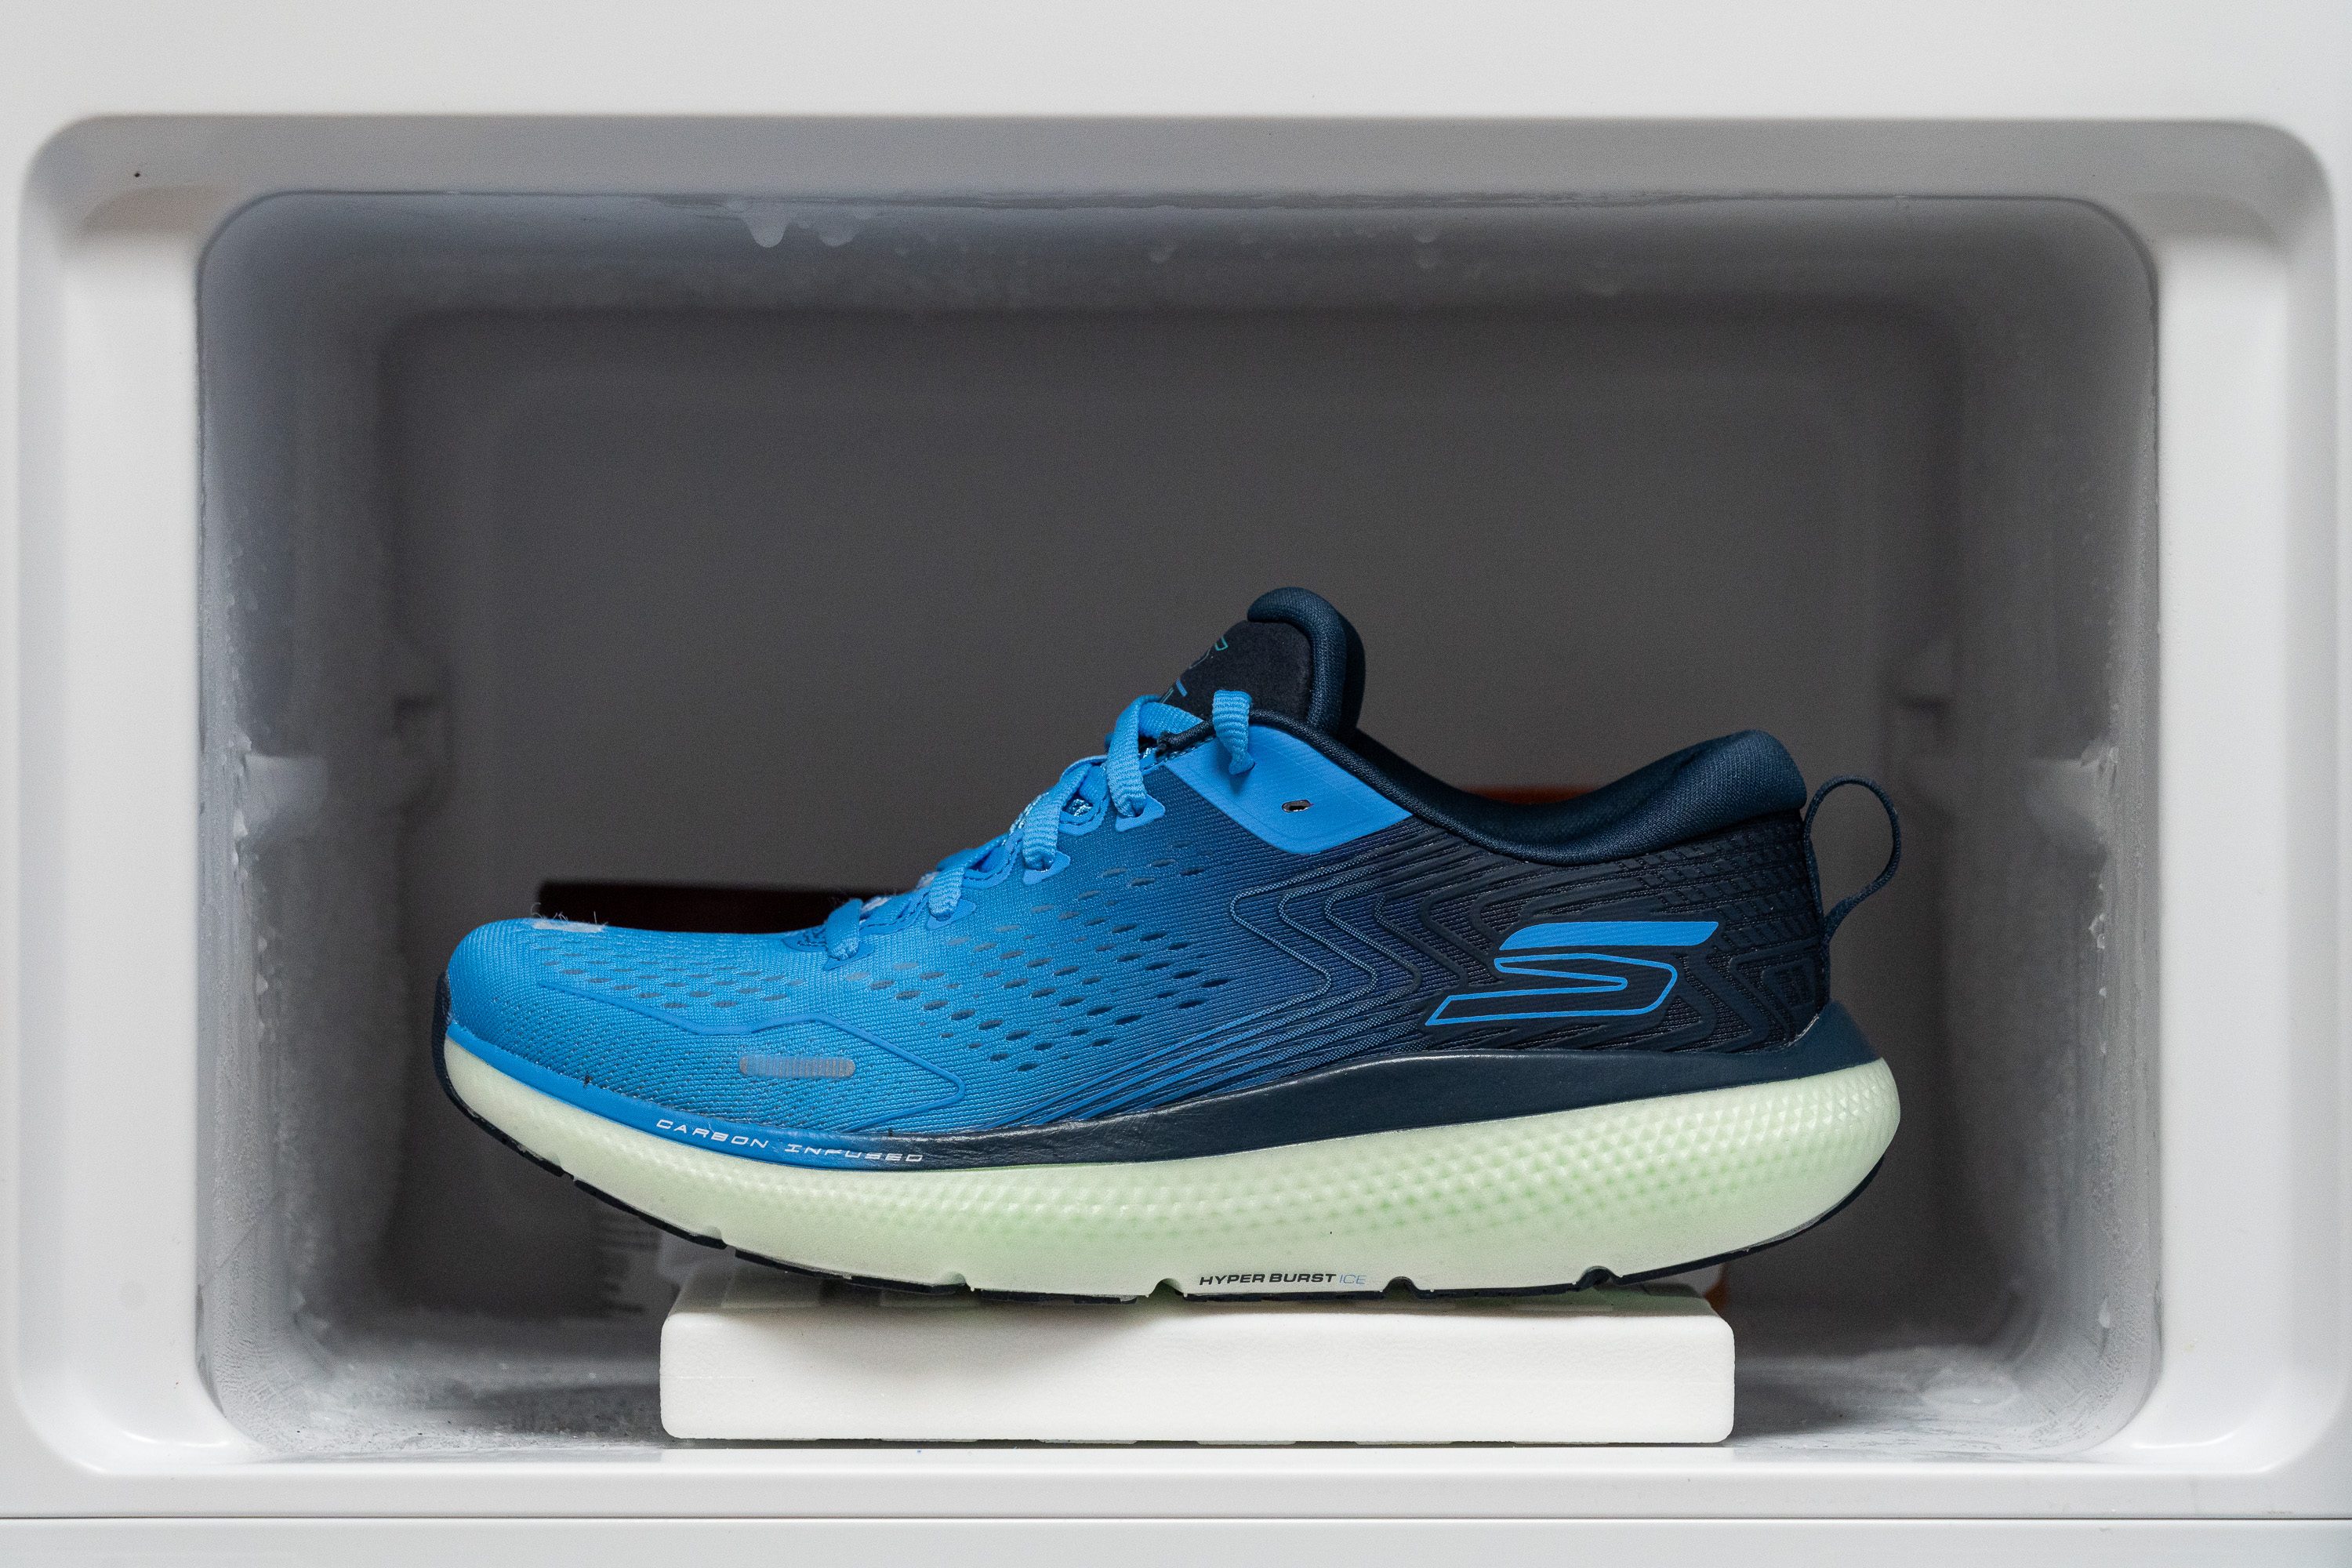 Skechers New Moon Midsole softness in cold